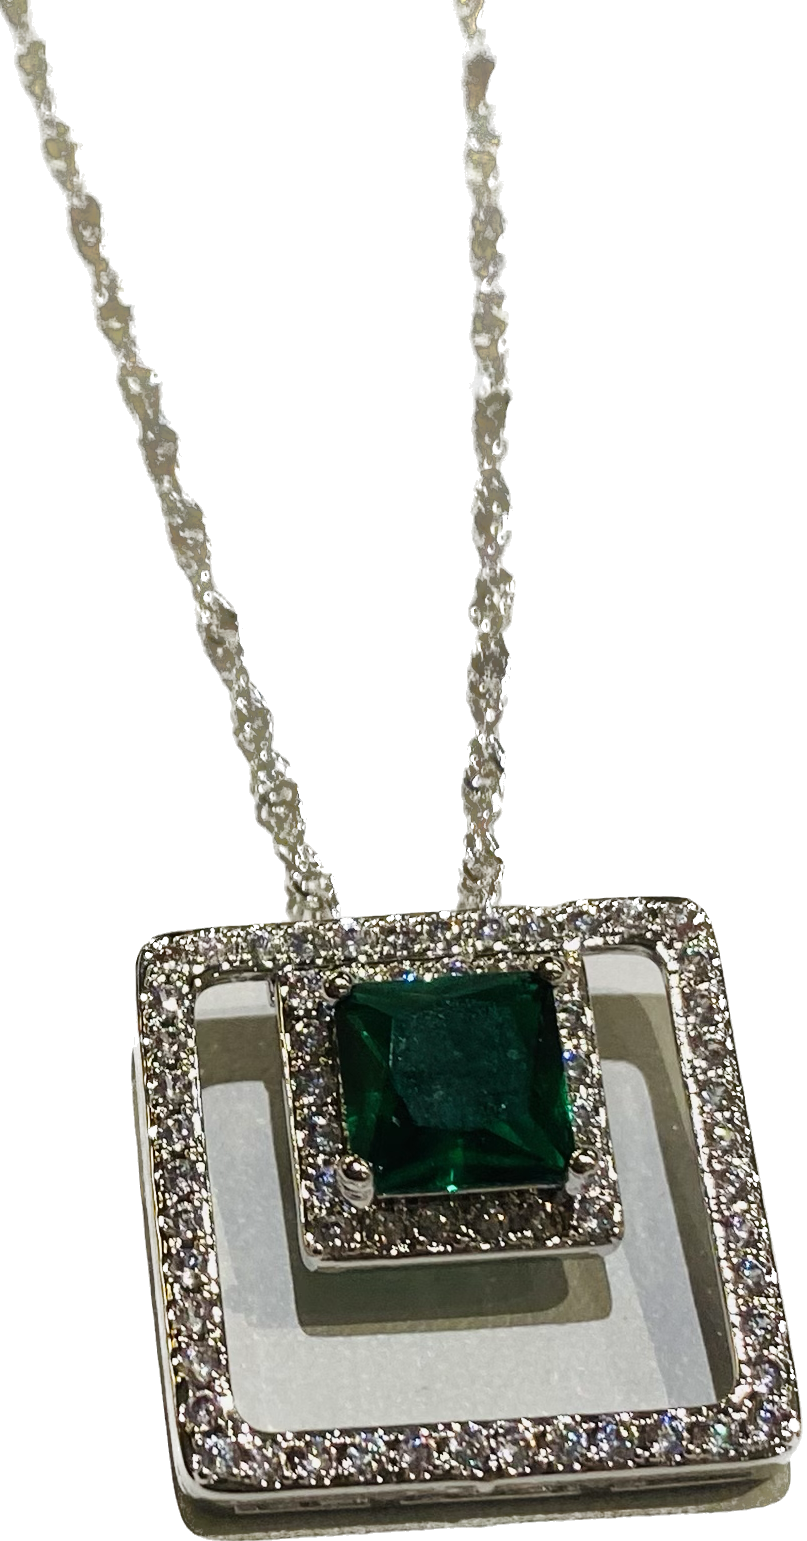 Lab Created Emerald Sterling Silver 925 Square Style Jewelry Set